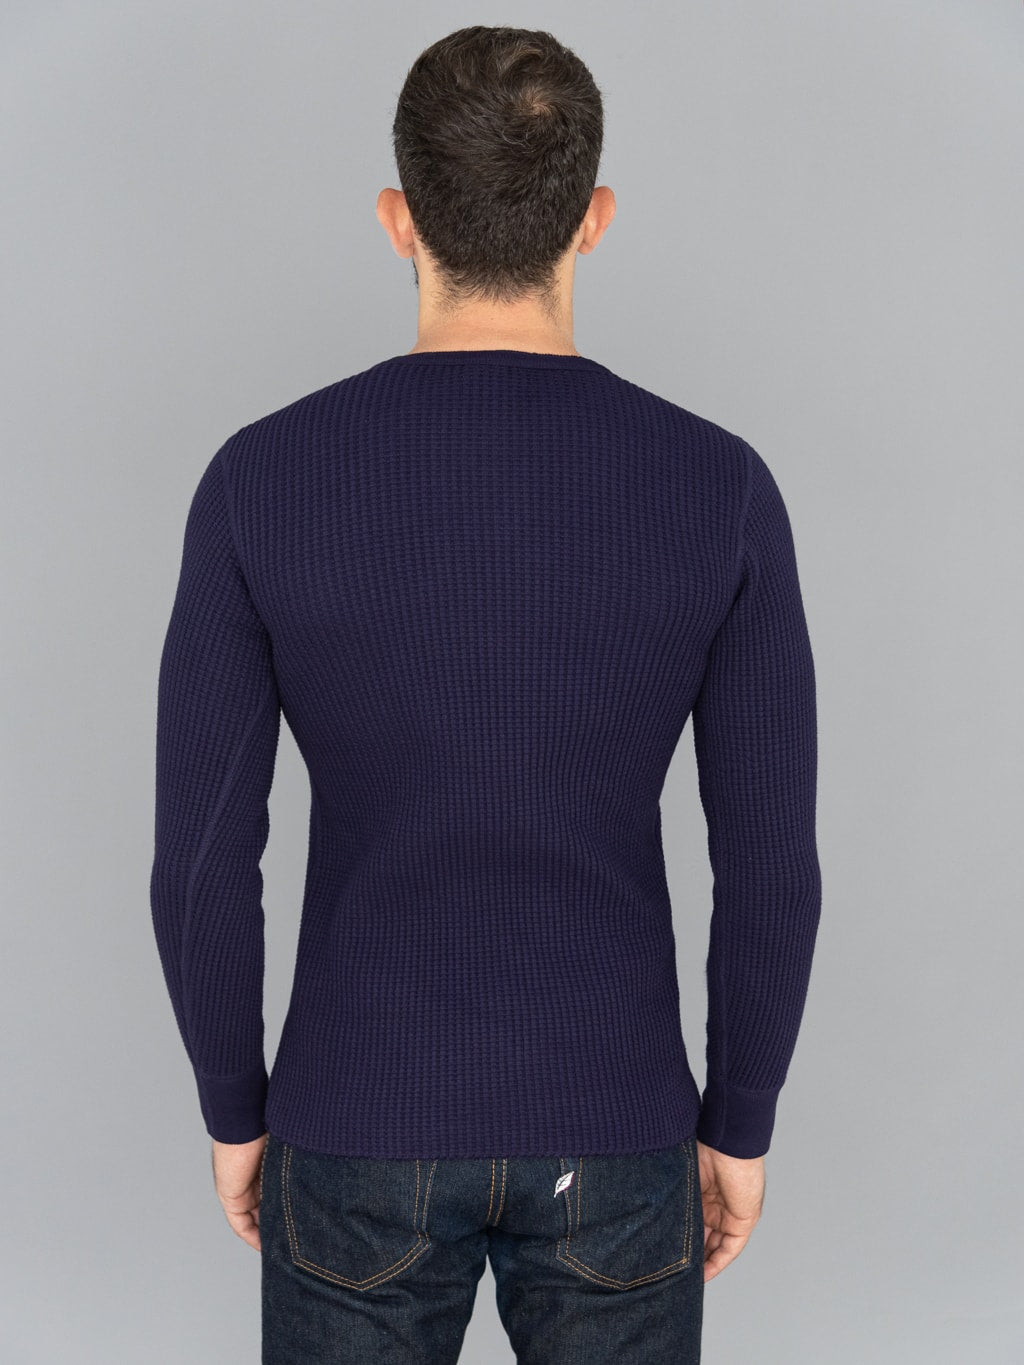 UES Thermal Waffle Long Sleeve Henley Navy slim back fit